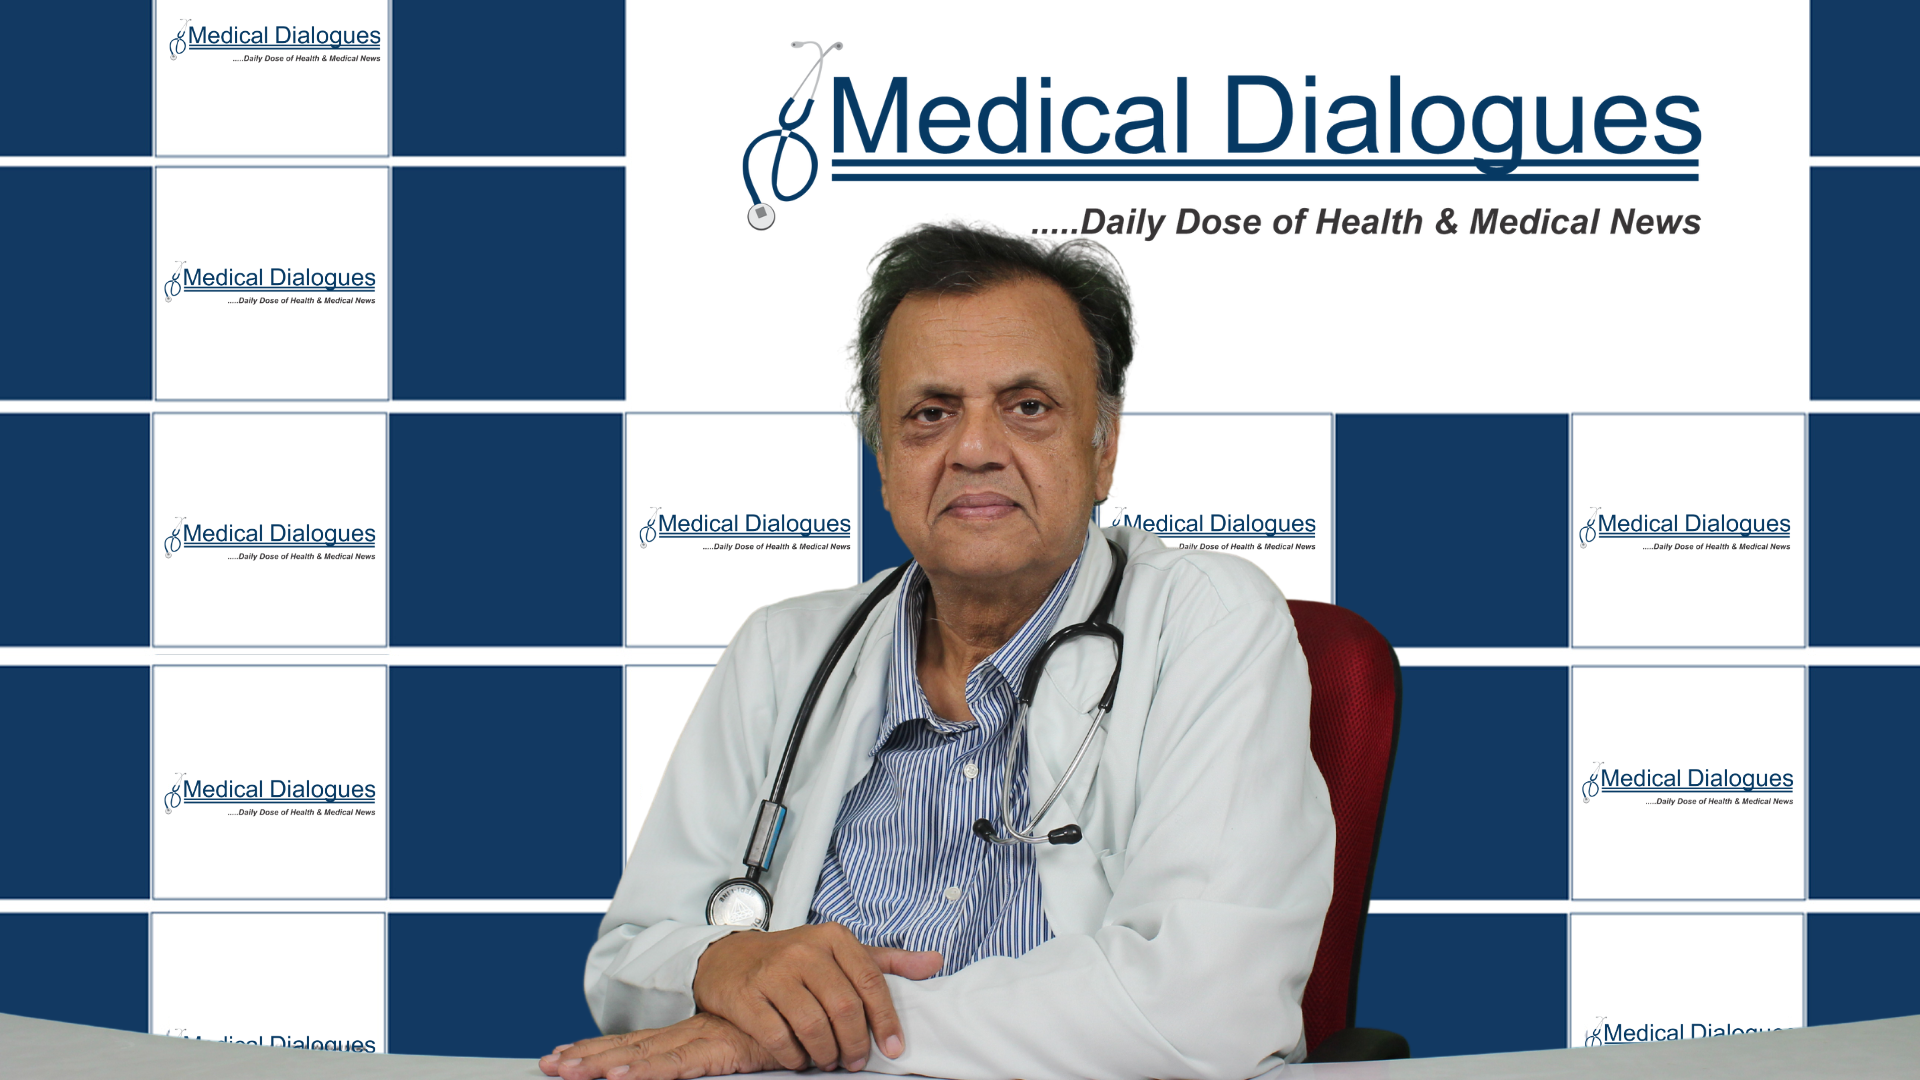 Dr. Prem Aggarwal, Co-founder of Medical Dialogues